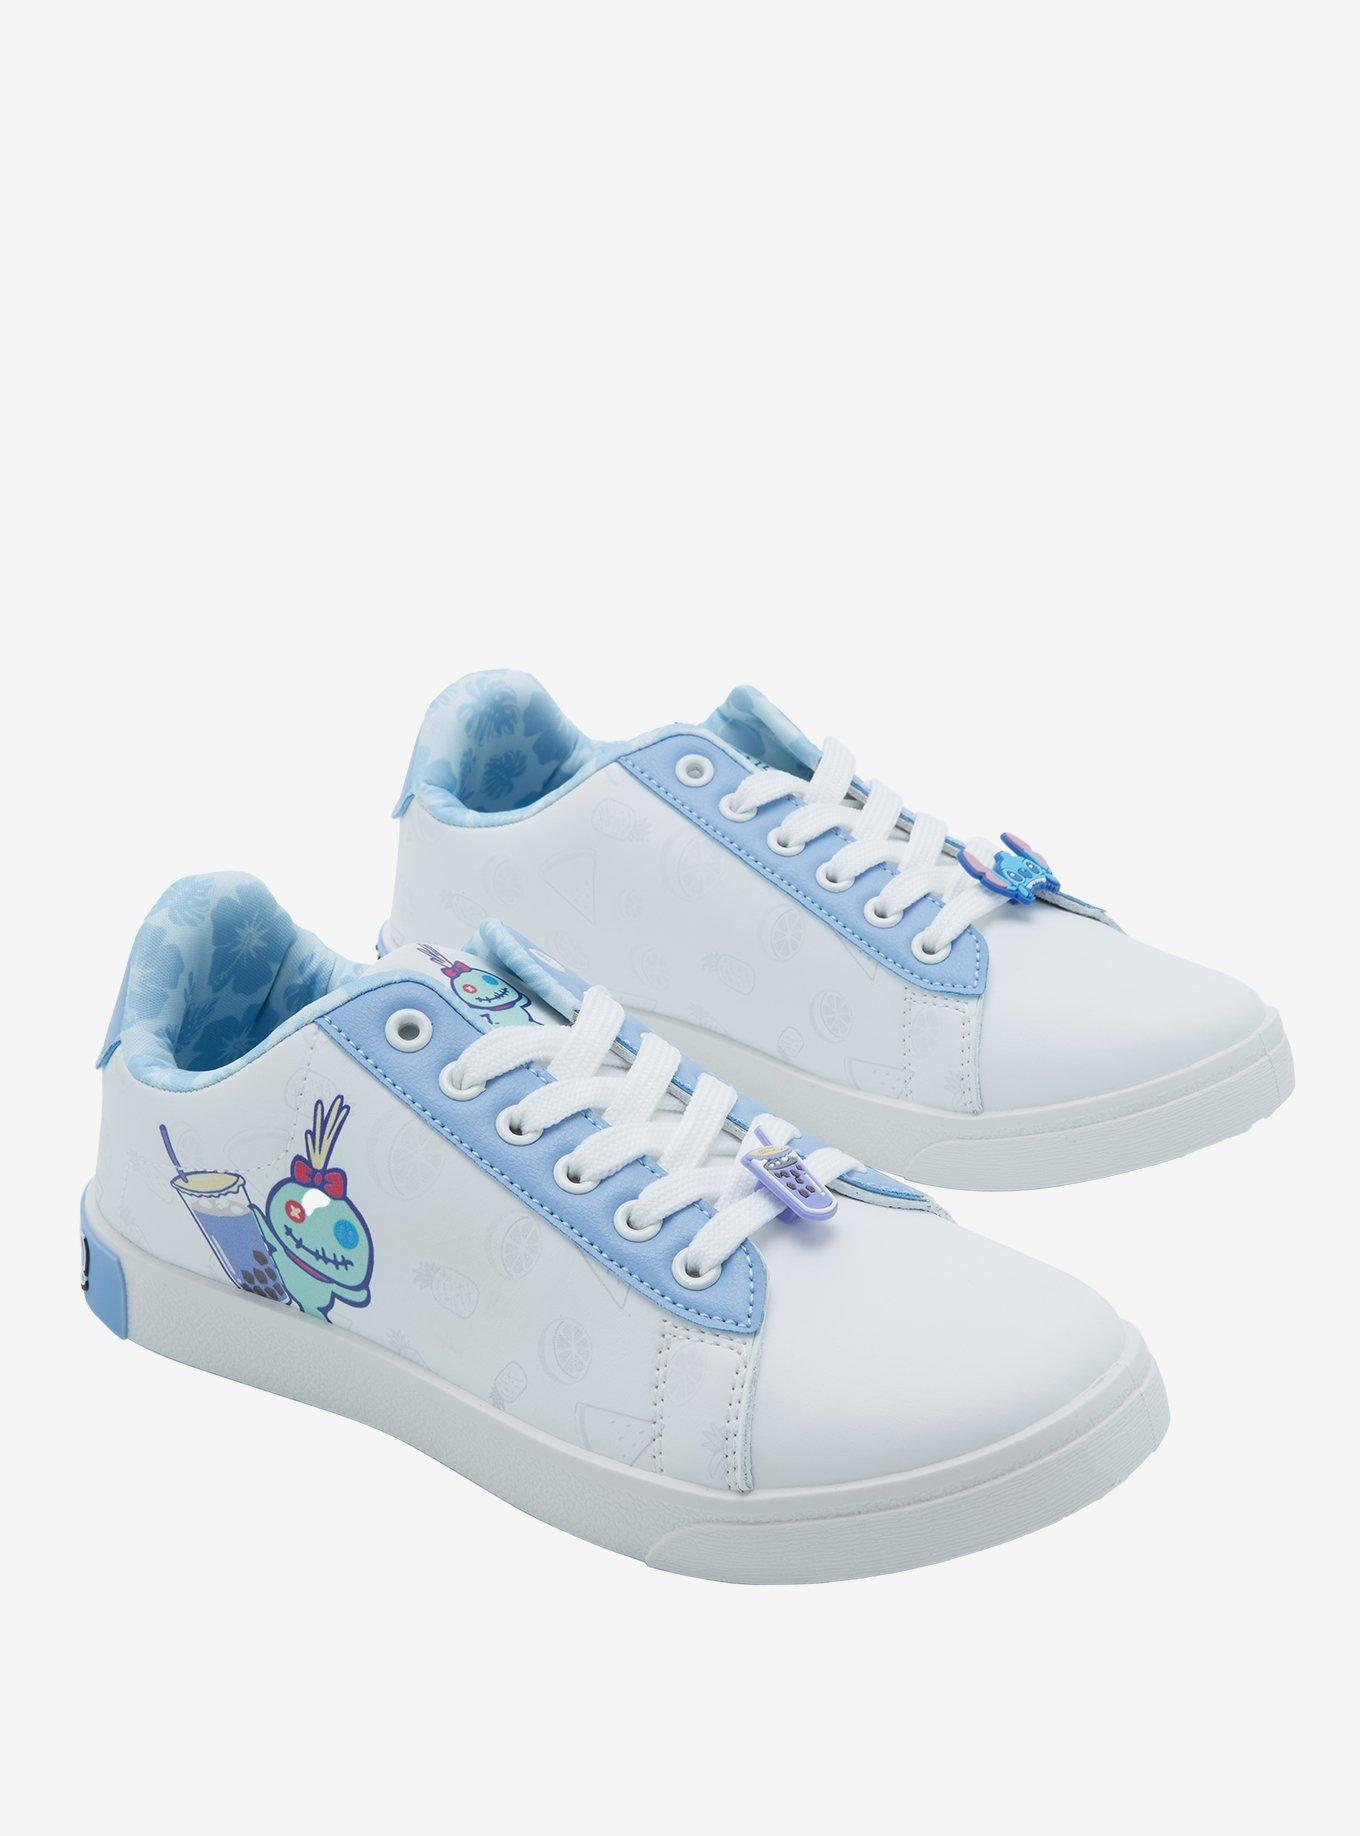 A NEW Disney Stitch Vans Collection Is Online Now! 